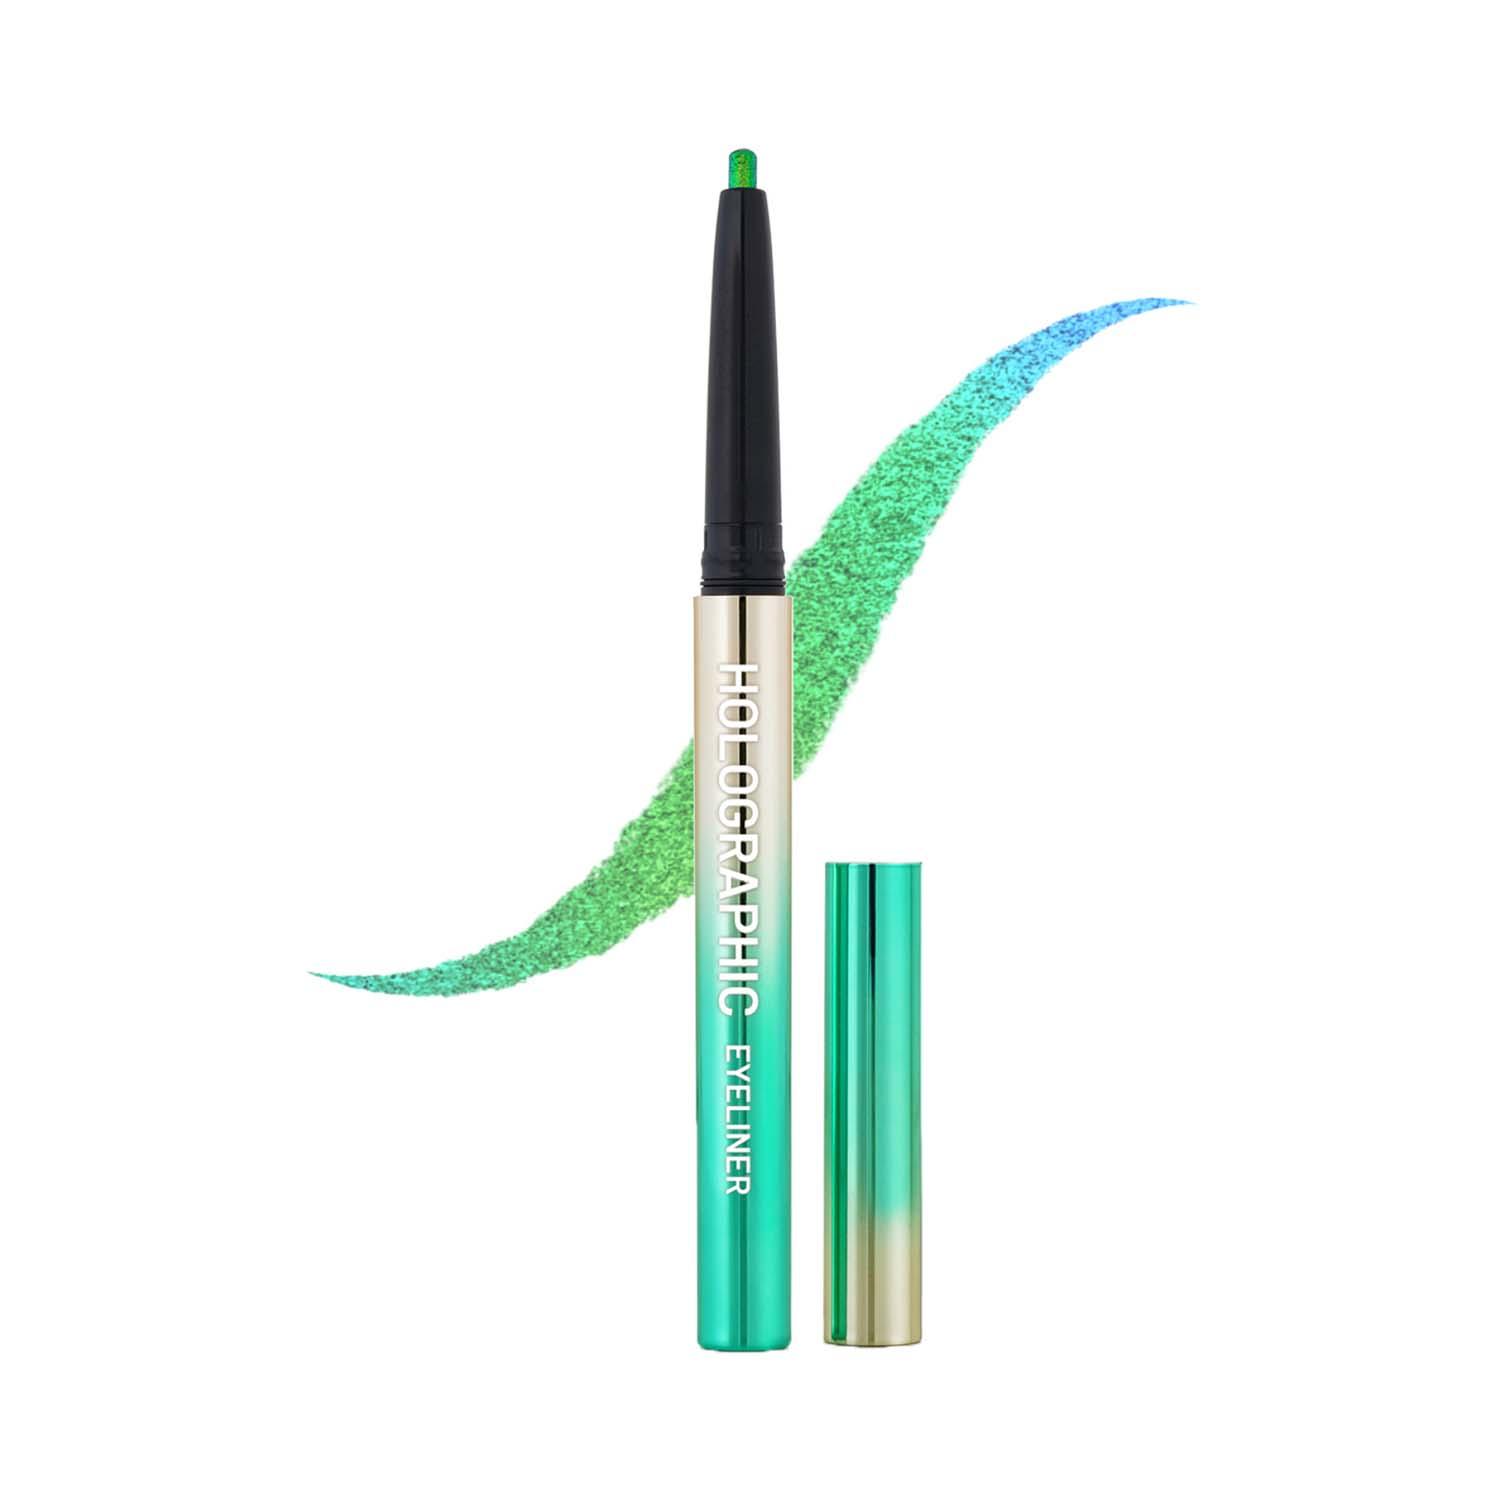 Swiss Beauty | Swiss Beauty Holographic Eyeliner - 06 Colored Earth (0.2 g)